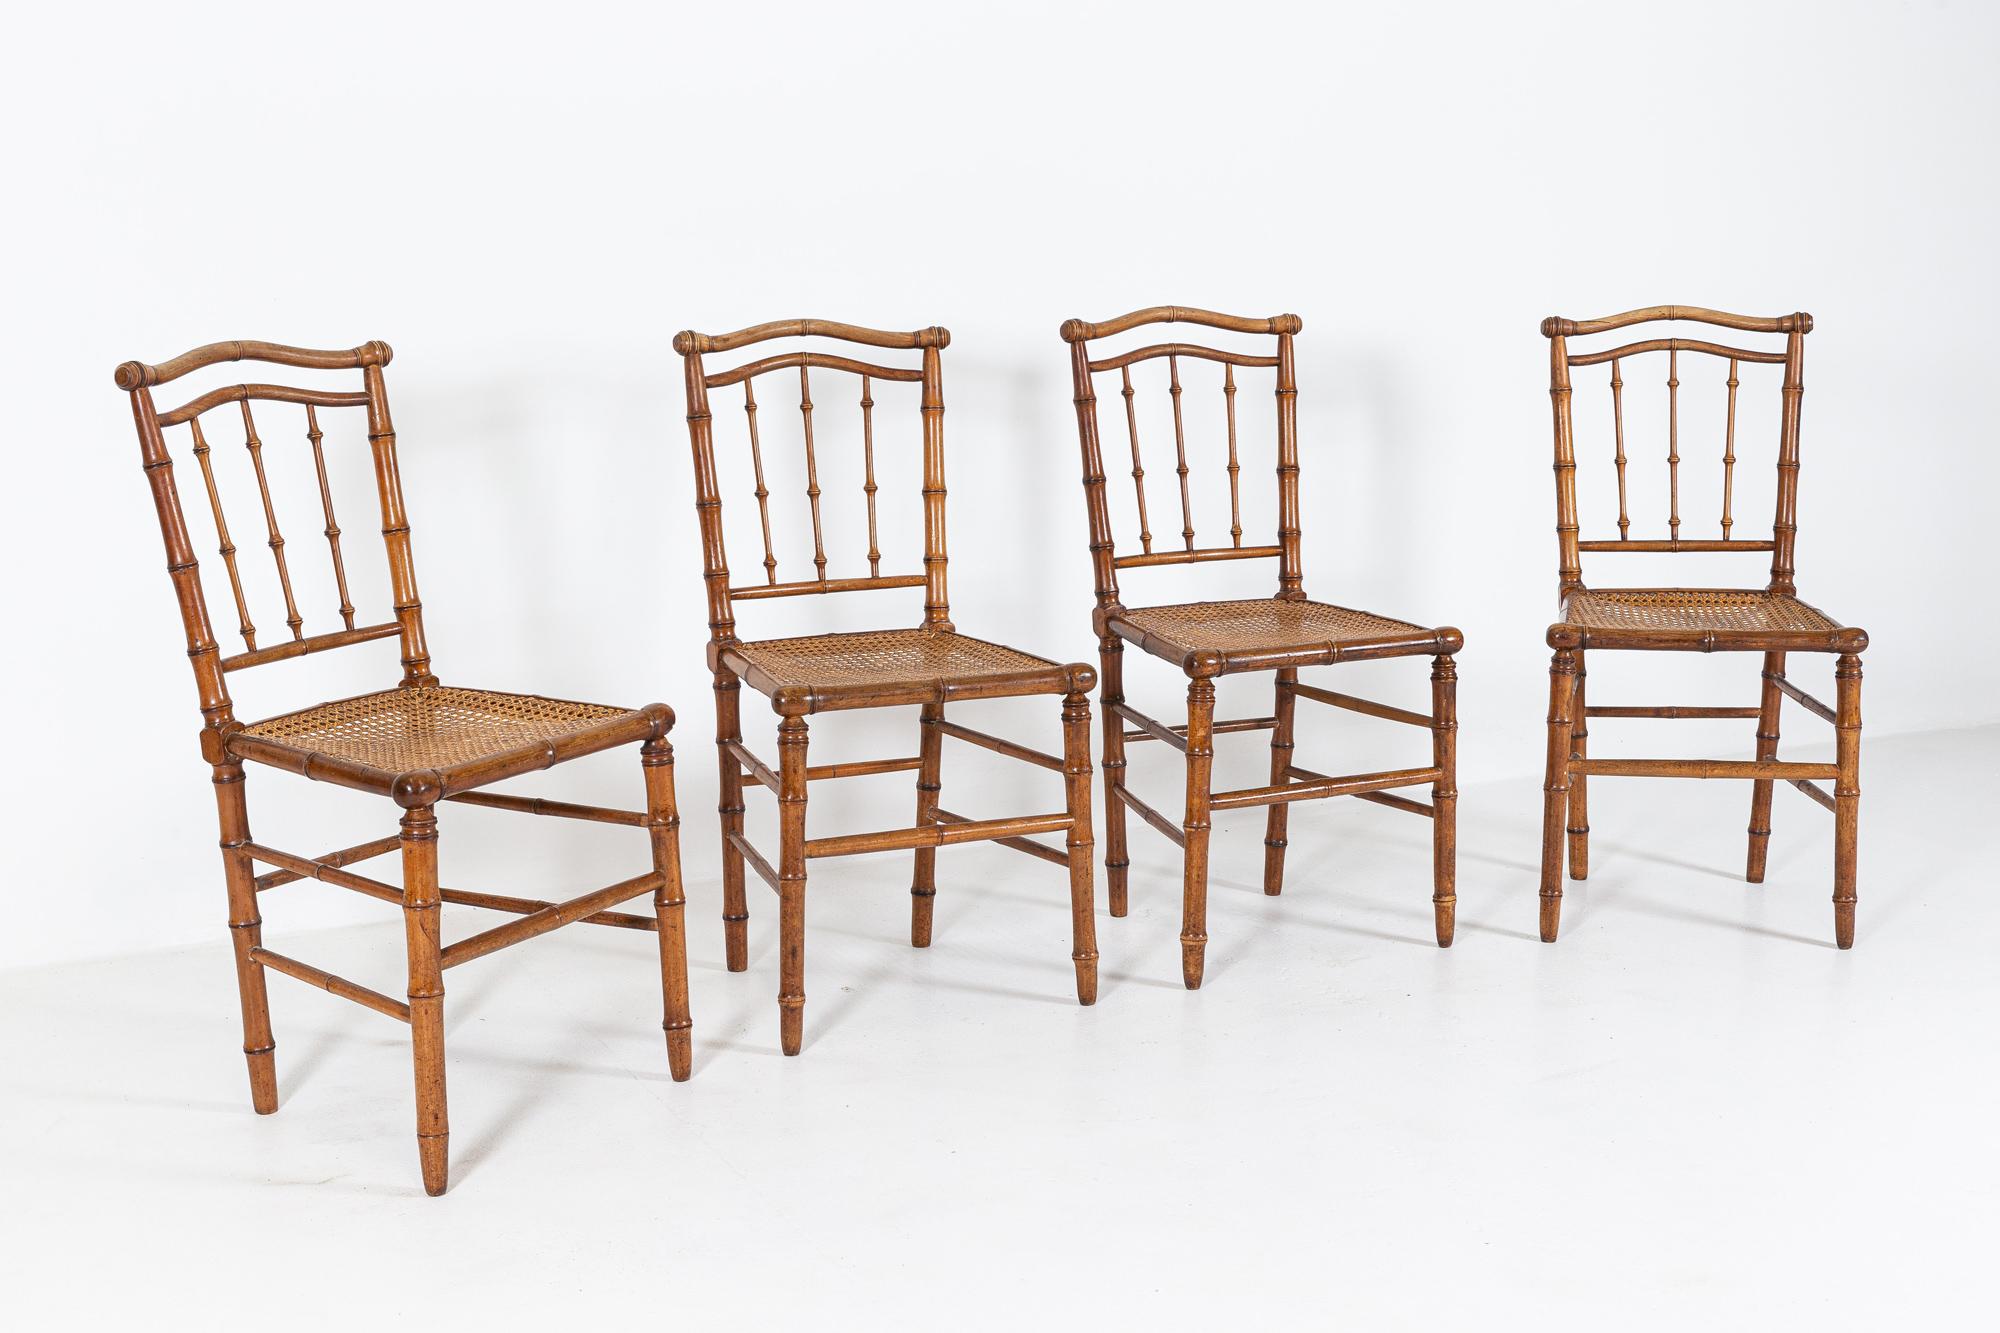 19thC Set of 4 French Faux Bamboo Rattan Chairs In Good Condition For Sale In Staffordshire, GB